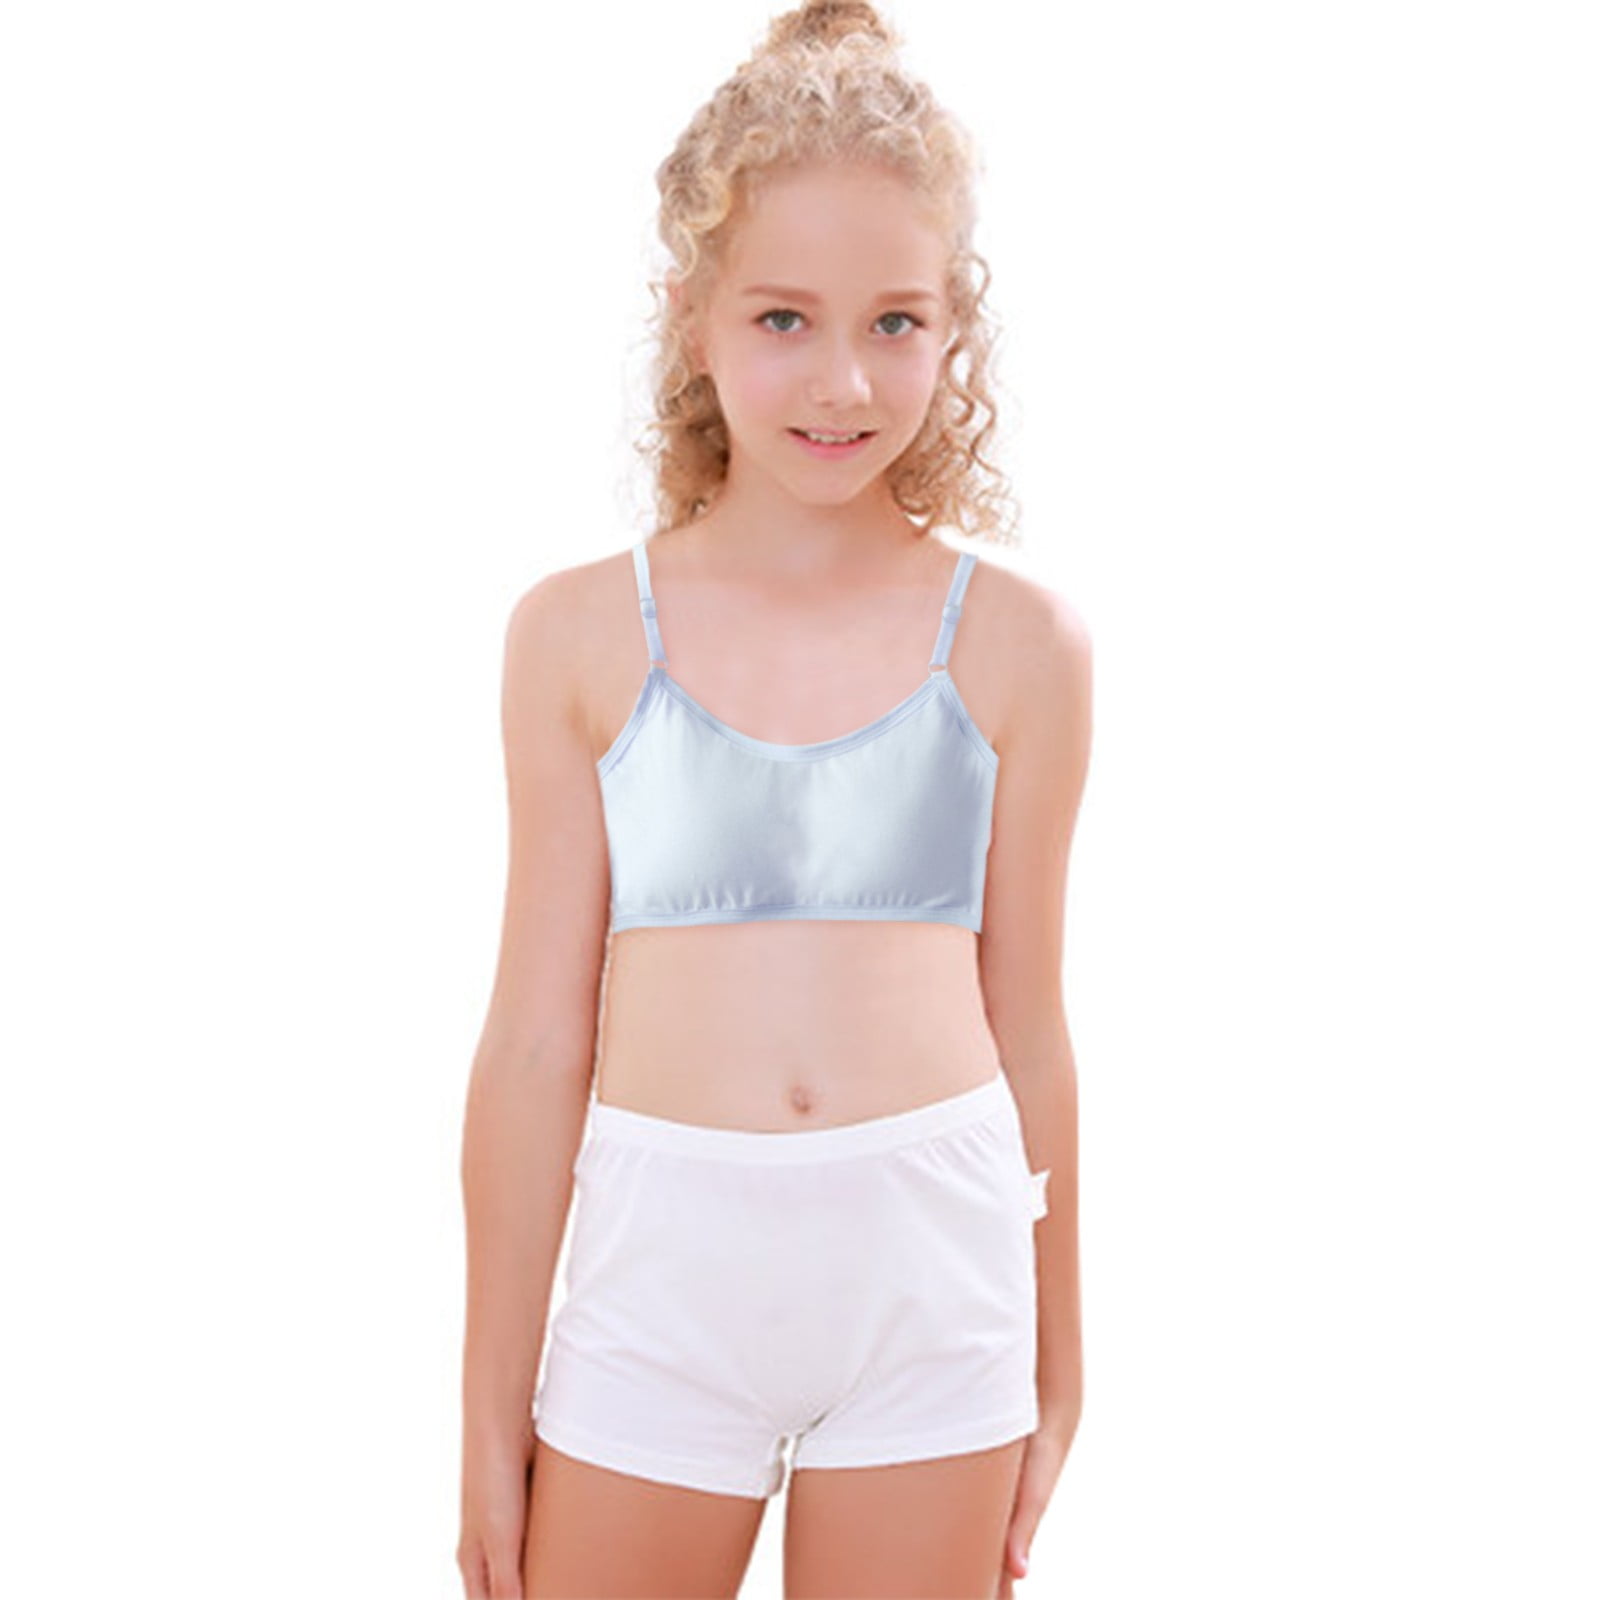 Buy Fair Beauty (Strowberry Teenager Full Coverage Women Cotton Bra Pack of  3 (B, White, 30) at